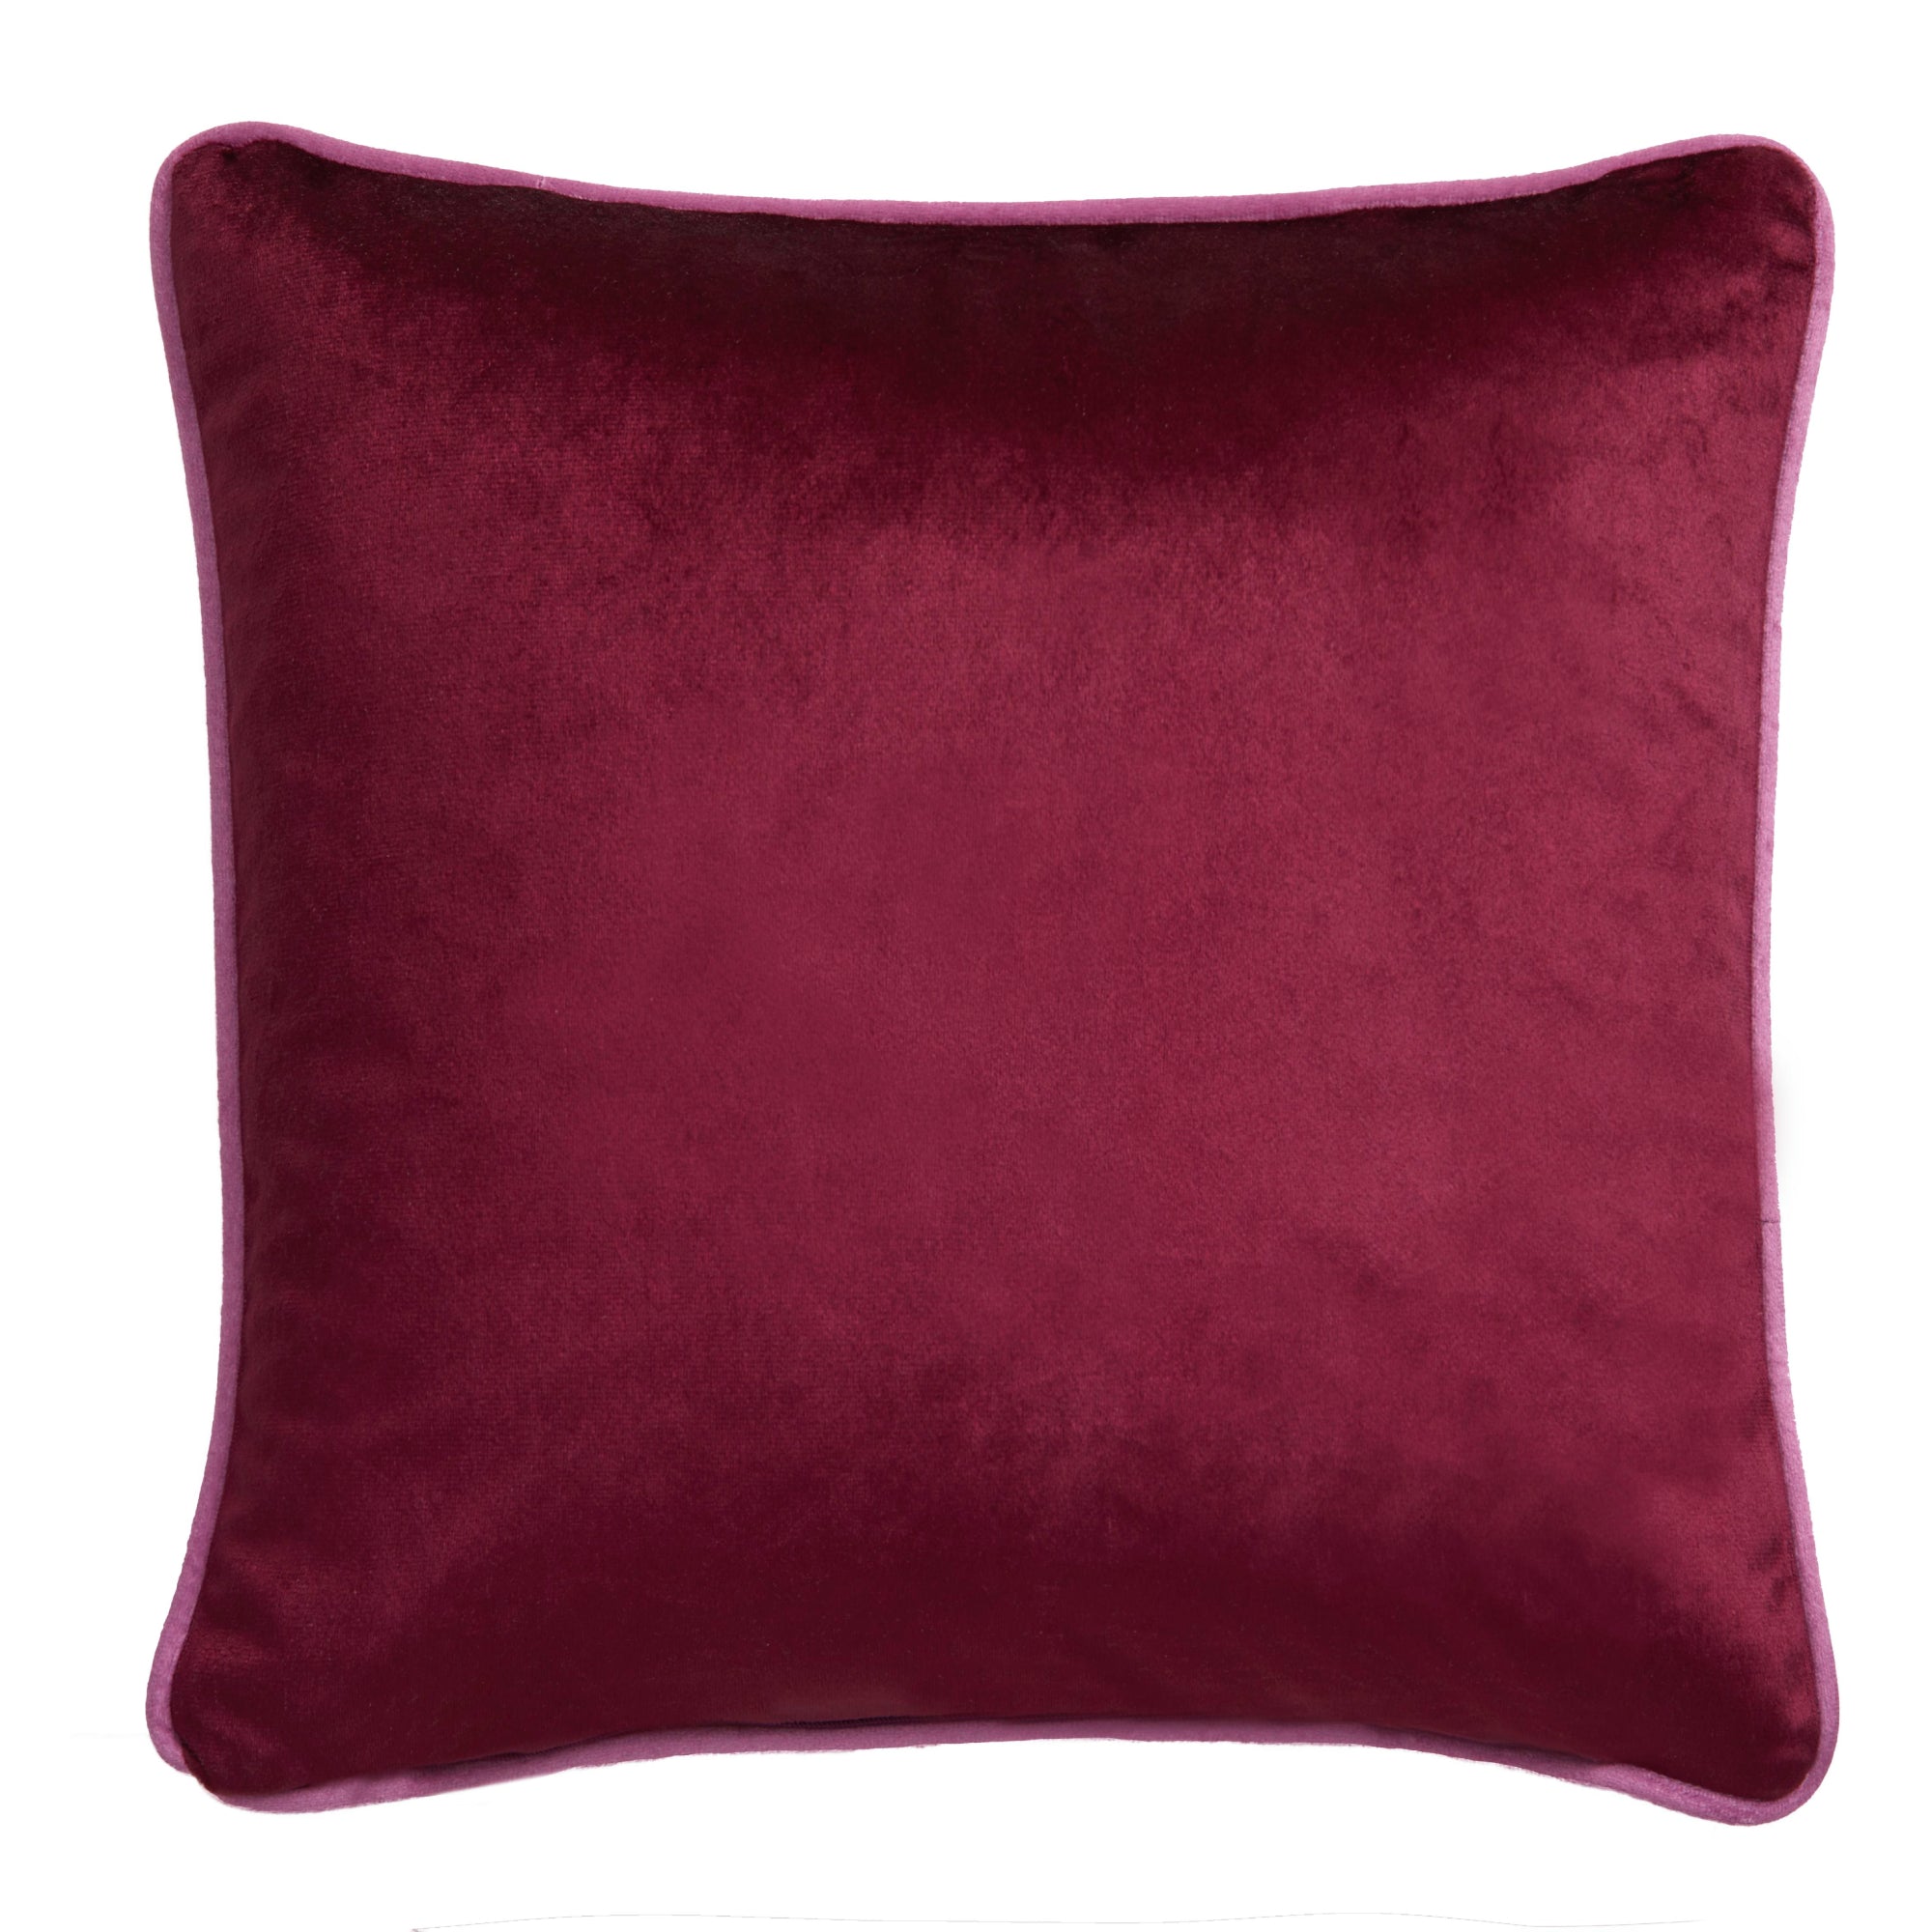 Filled Cushion Birdity Absurdity by Laurence Llewelyn-Bowen in Pink